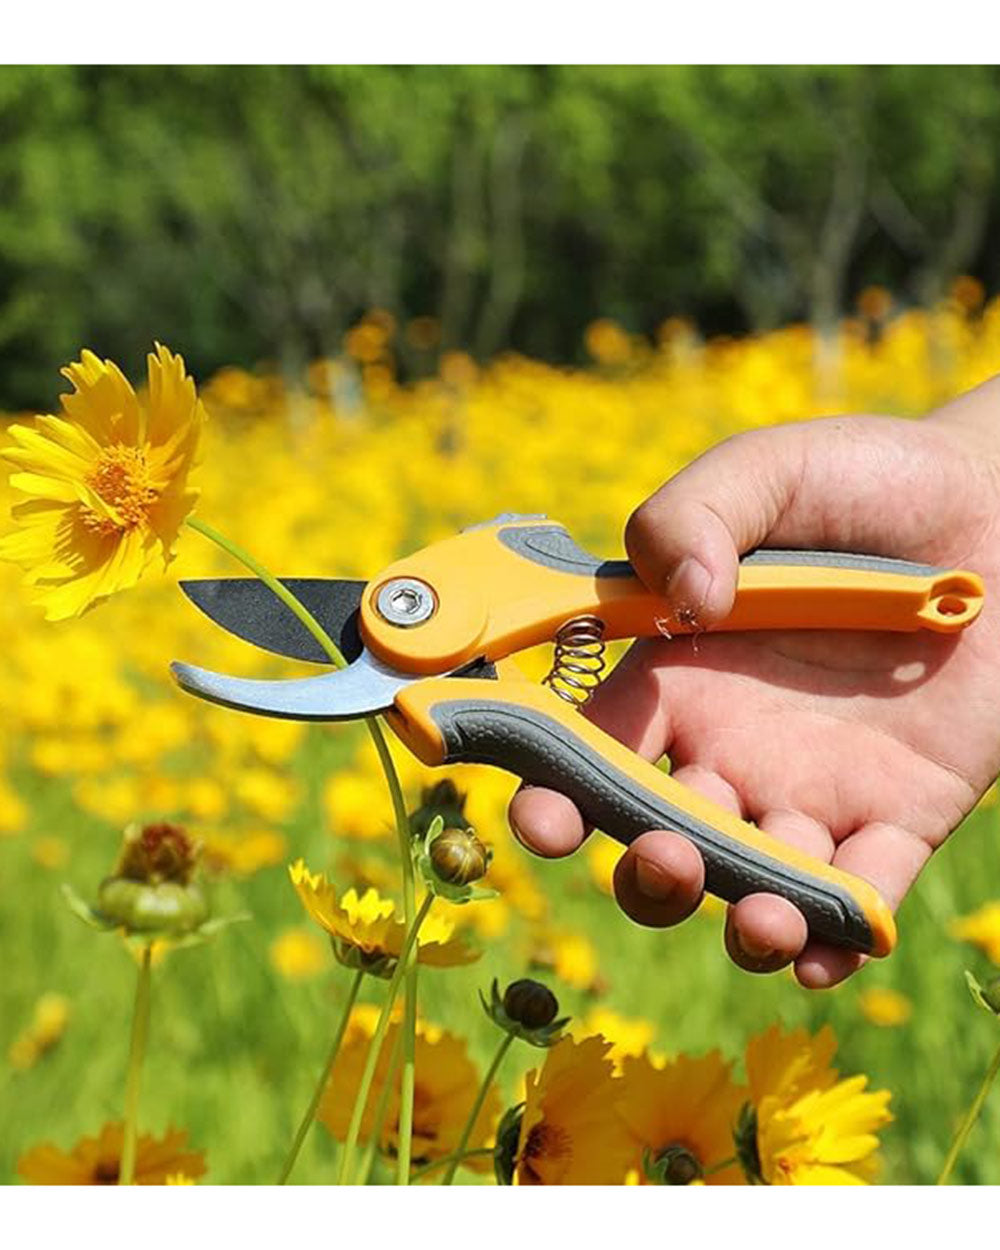 AIRJA Proffessional Garden Shears and Hedge Clippers Set